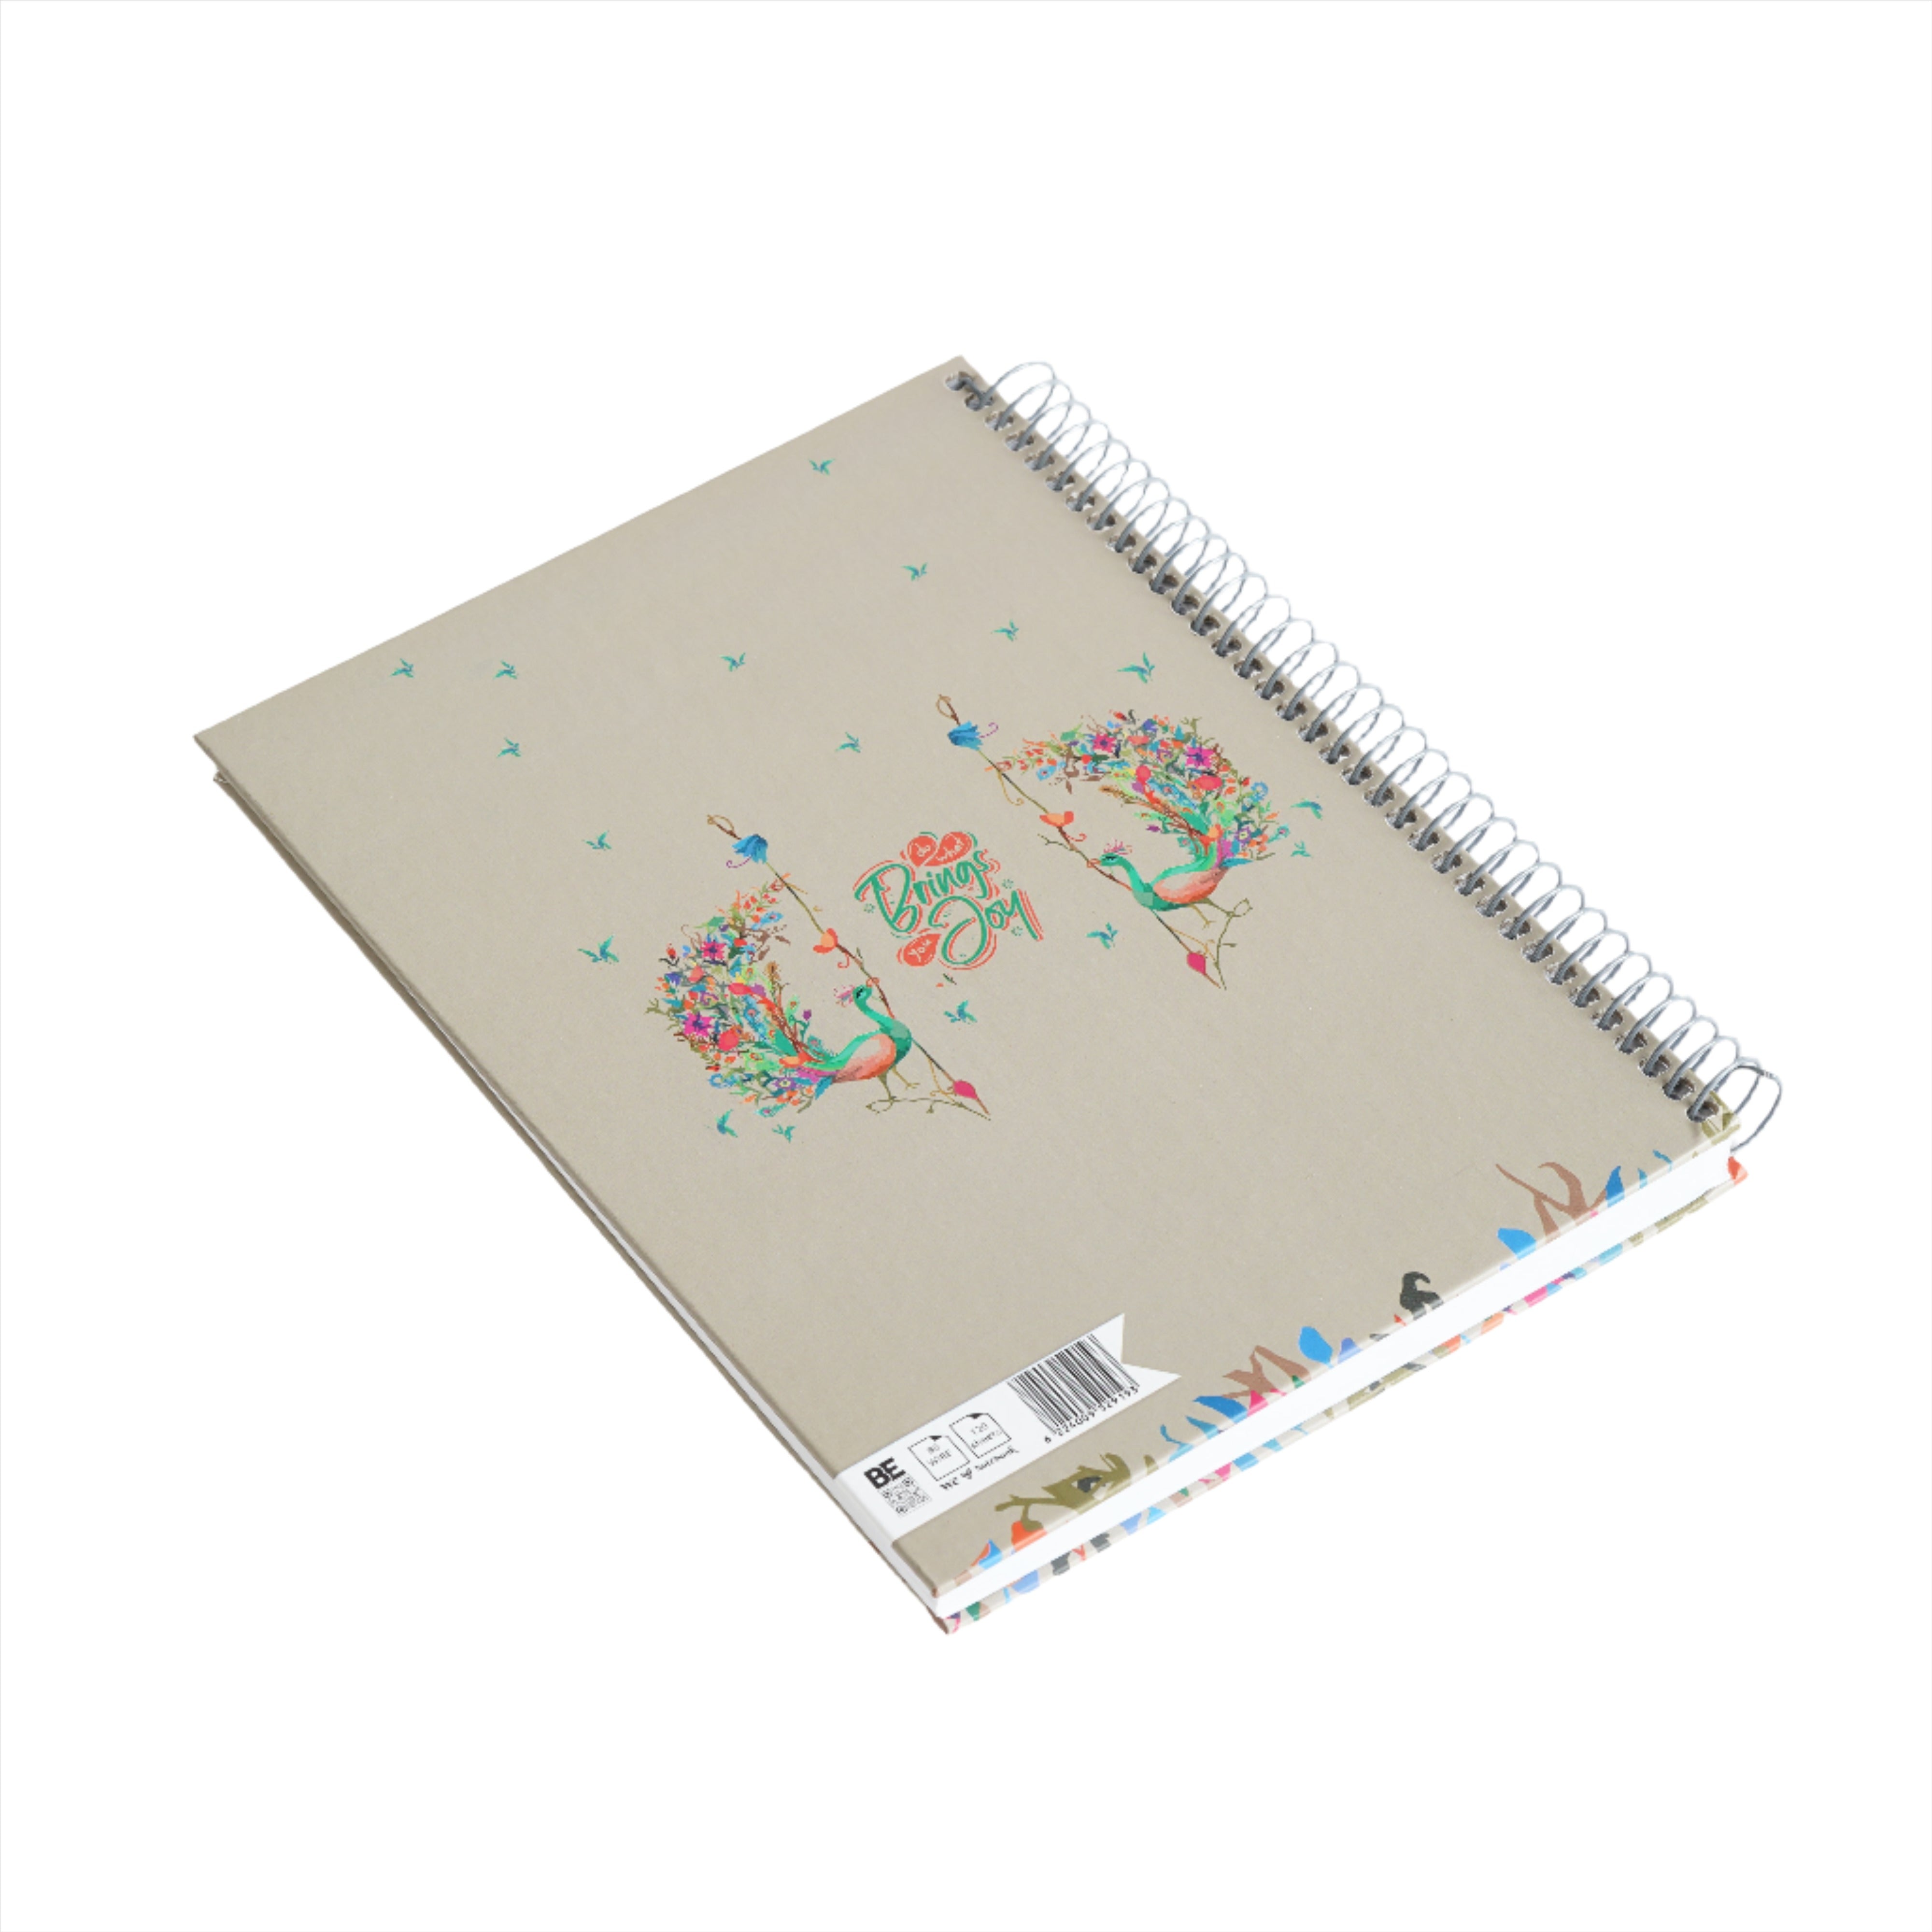 2BE Spiral Notebook B5 120 sheets - Do What Bring You Joy